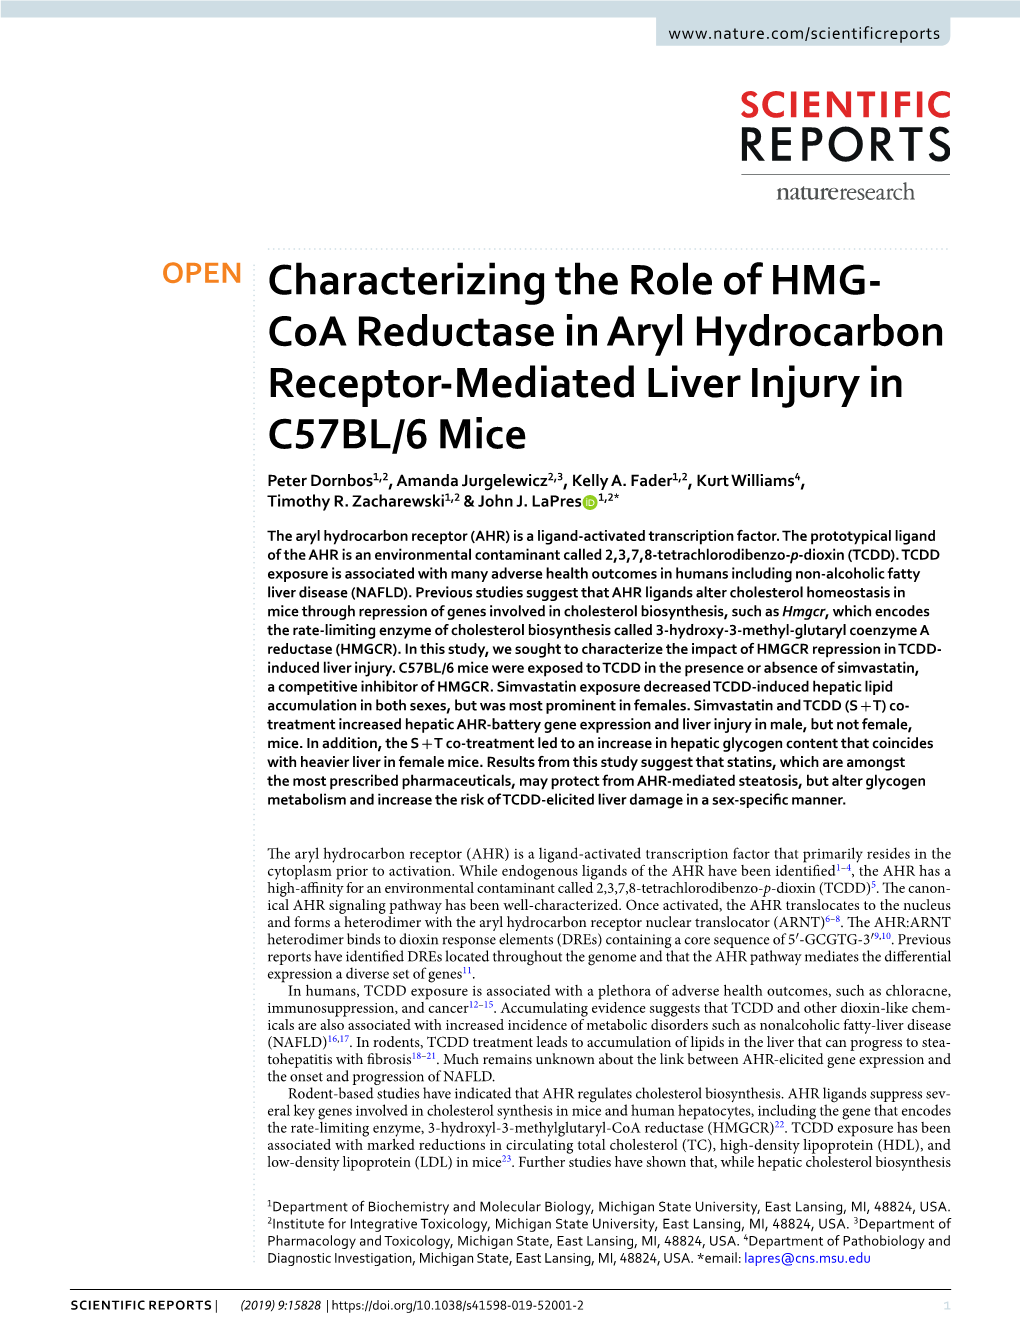 Characterizing the Role of HMG-Coa Reductase in Aryl Hydrocarbon